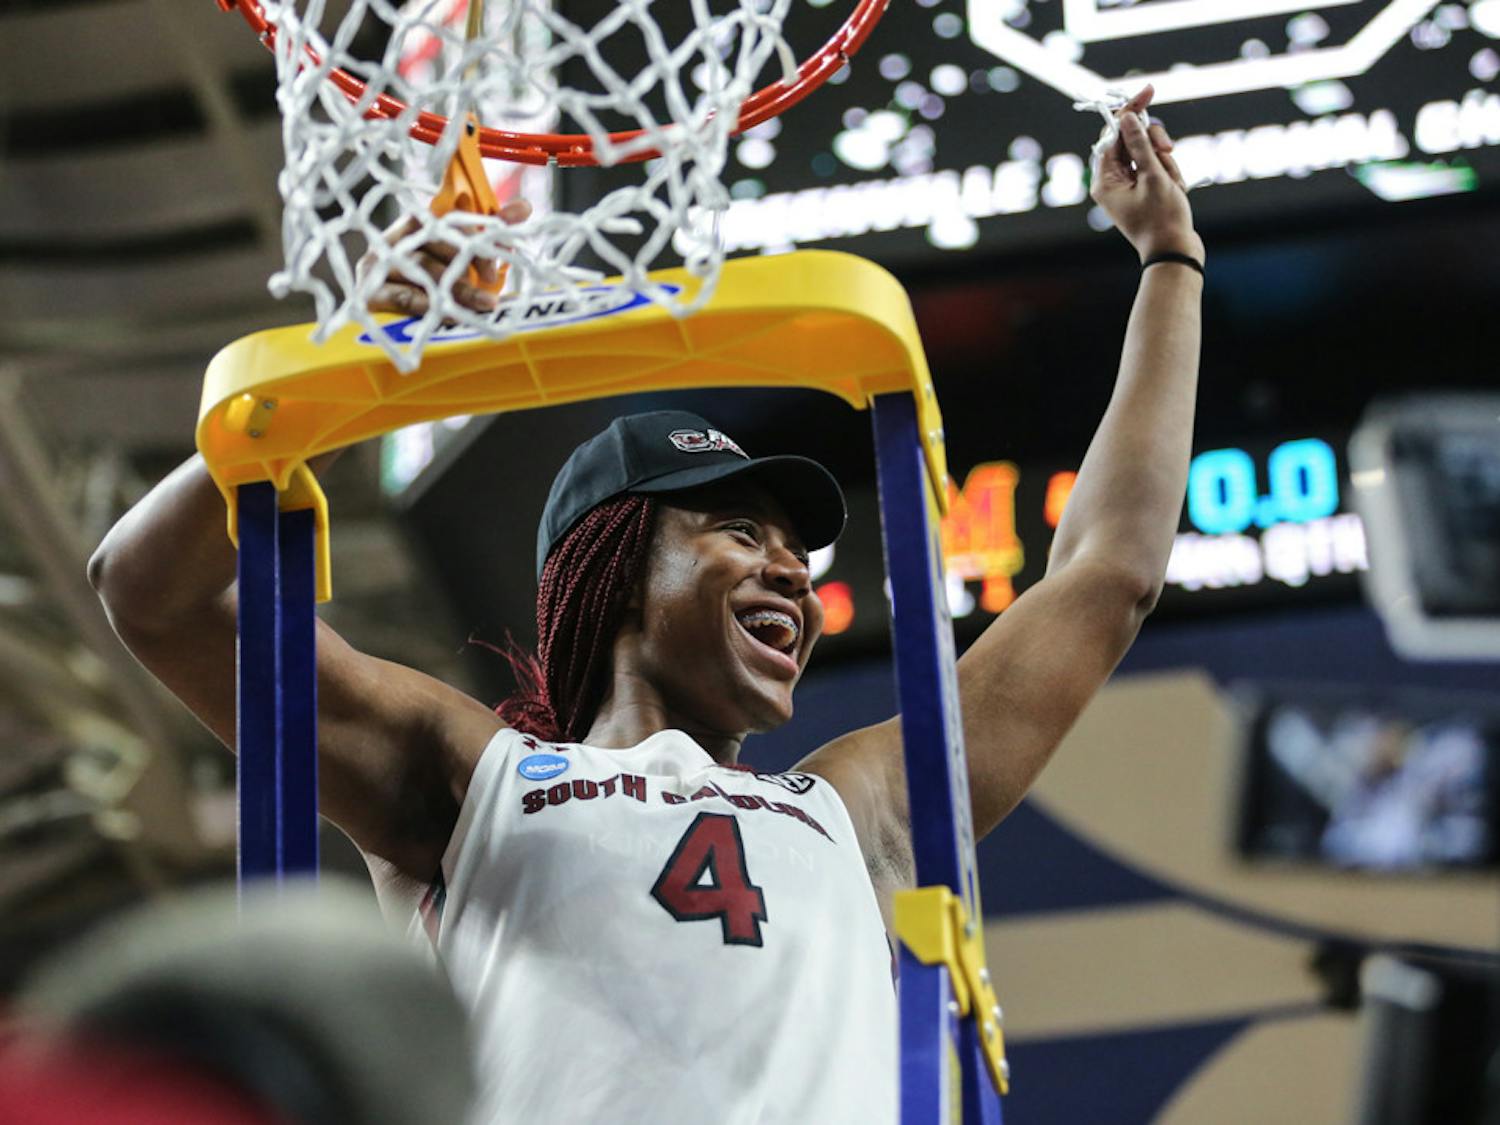 The South Carolina women's basketball team advanced to the Final Four after winning the NCAA Regional Championship at the Bon Secours Wellness Arena in Greenville, S.C. on March 27, 2023. South Carolina defeated Maryland 86-75.